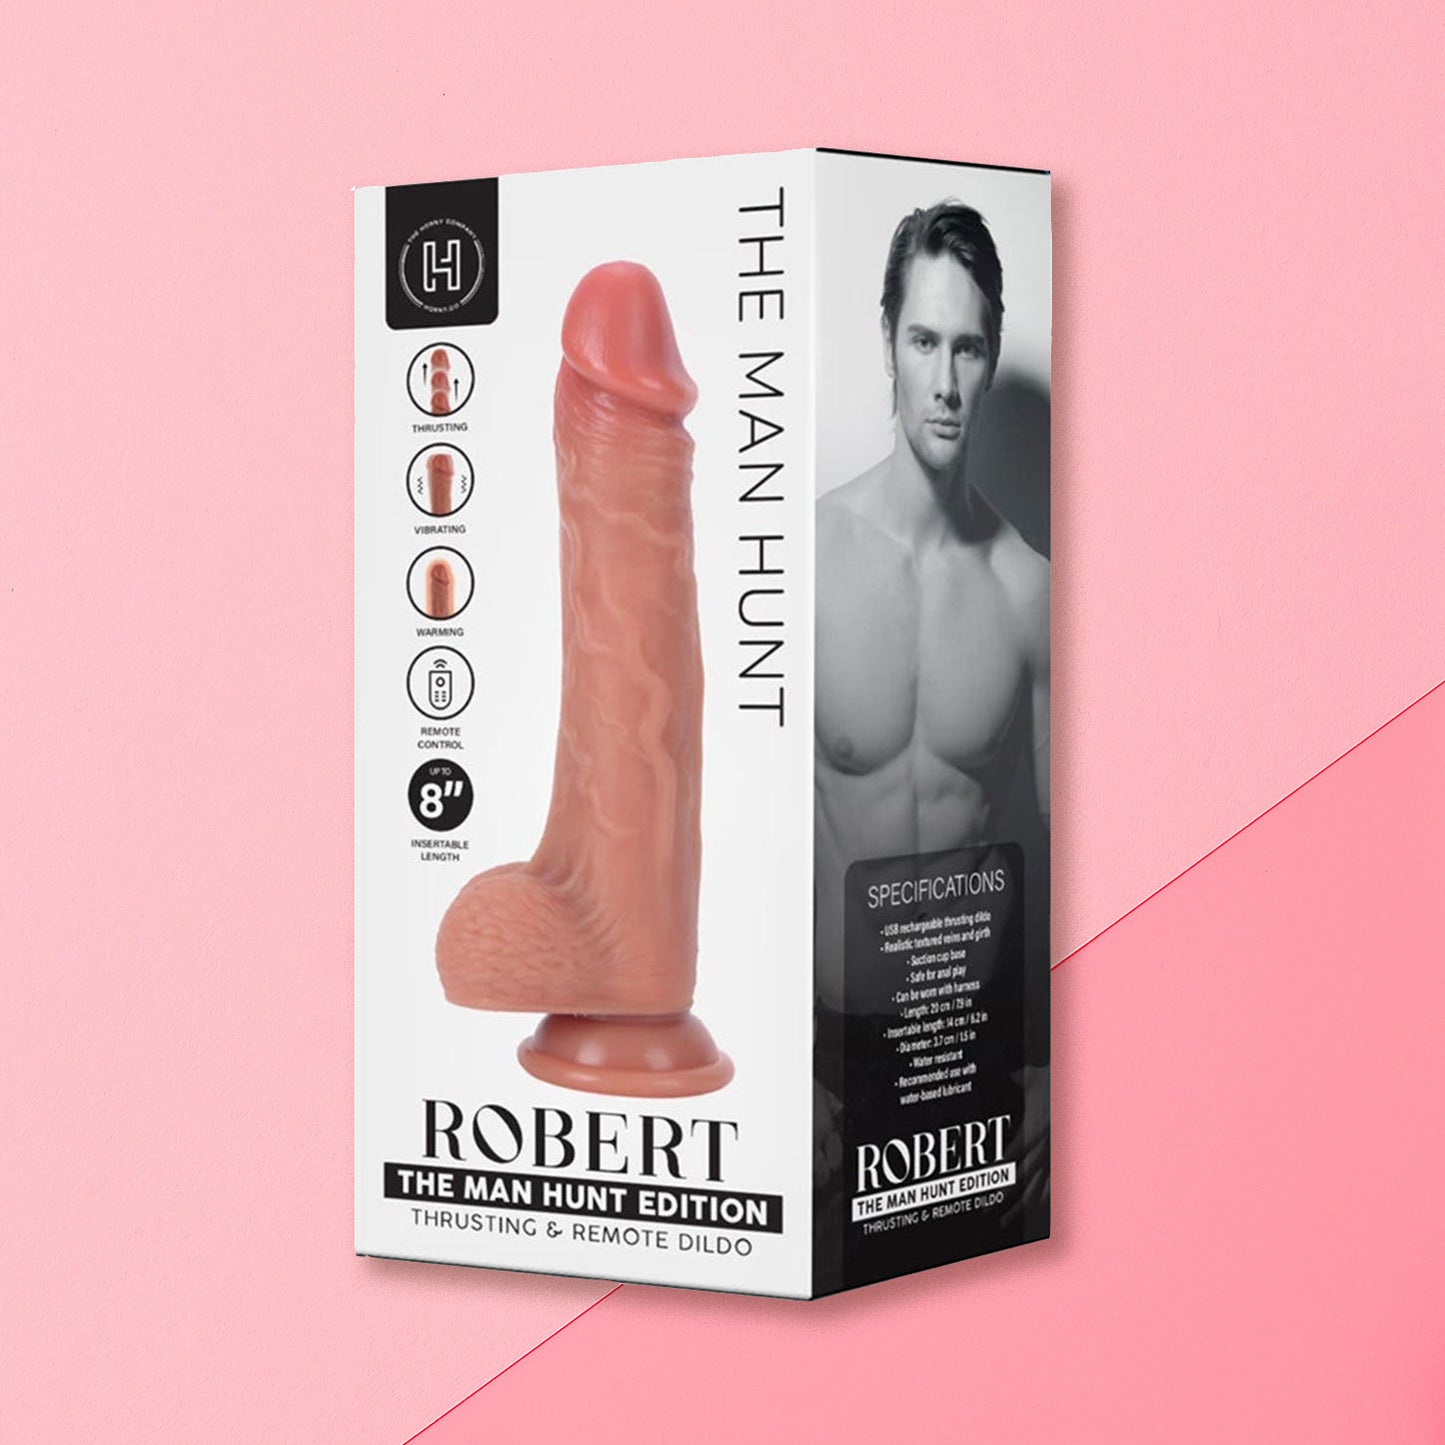 The Horny Company - Damn Realistic Dildo Man Hunt Edition Robert Remote Controlled Thrusting Silicone Dong